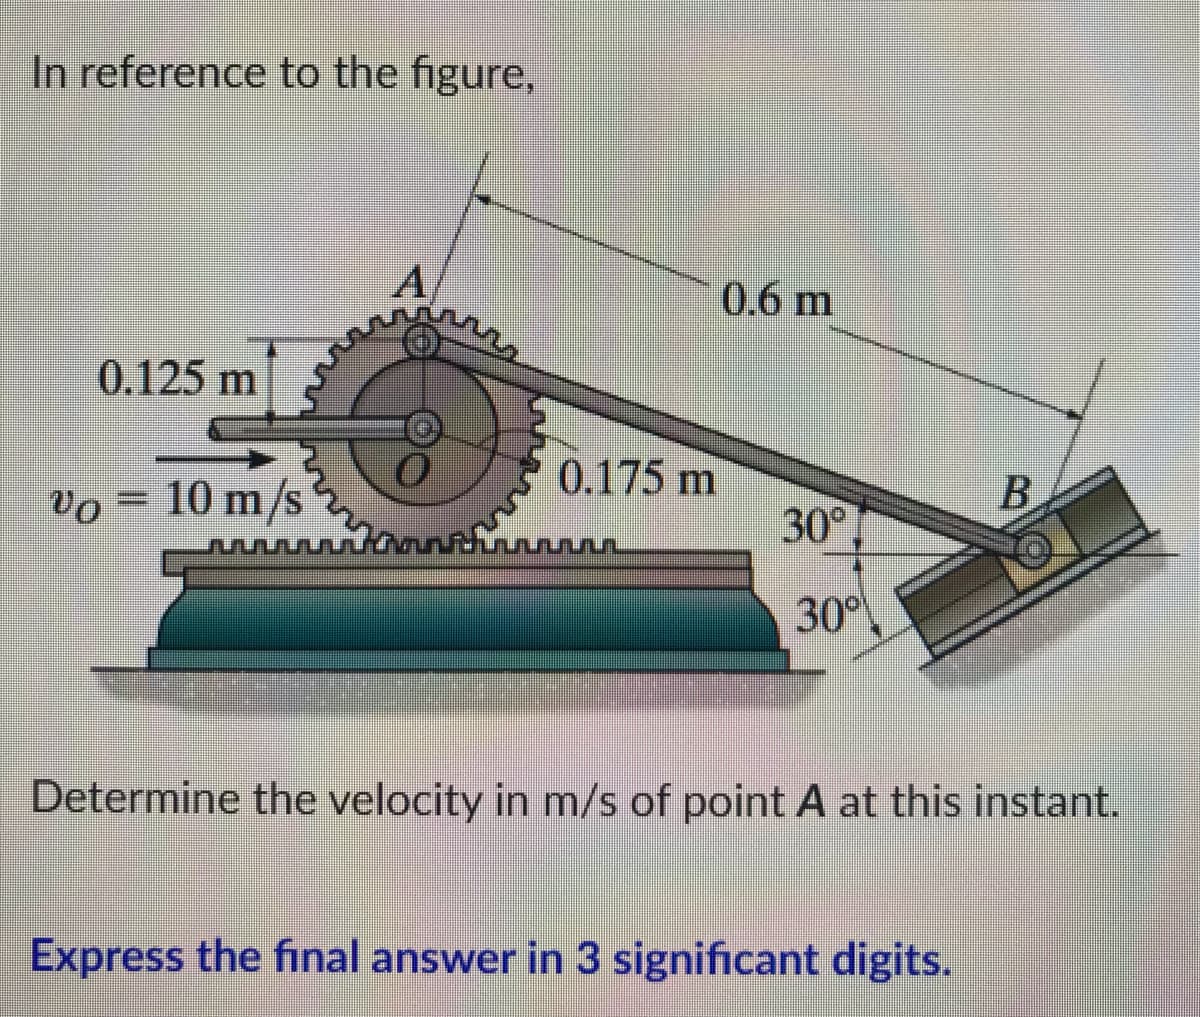 In reference to the figure,
A
0.125 m
Vo= 10 m/s2
www
30%
Determine the velocity in m/s of point A at this instant.
Express the final answer in 3 significant digits.
0.175 m
0.6 m
30°